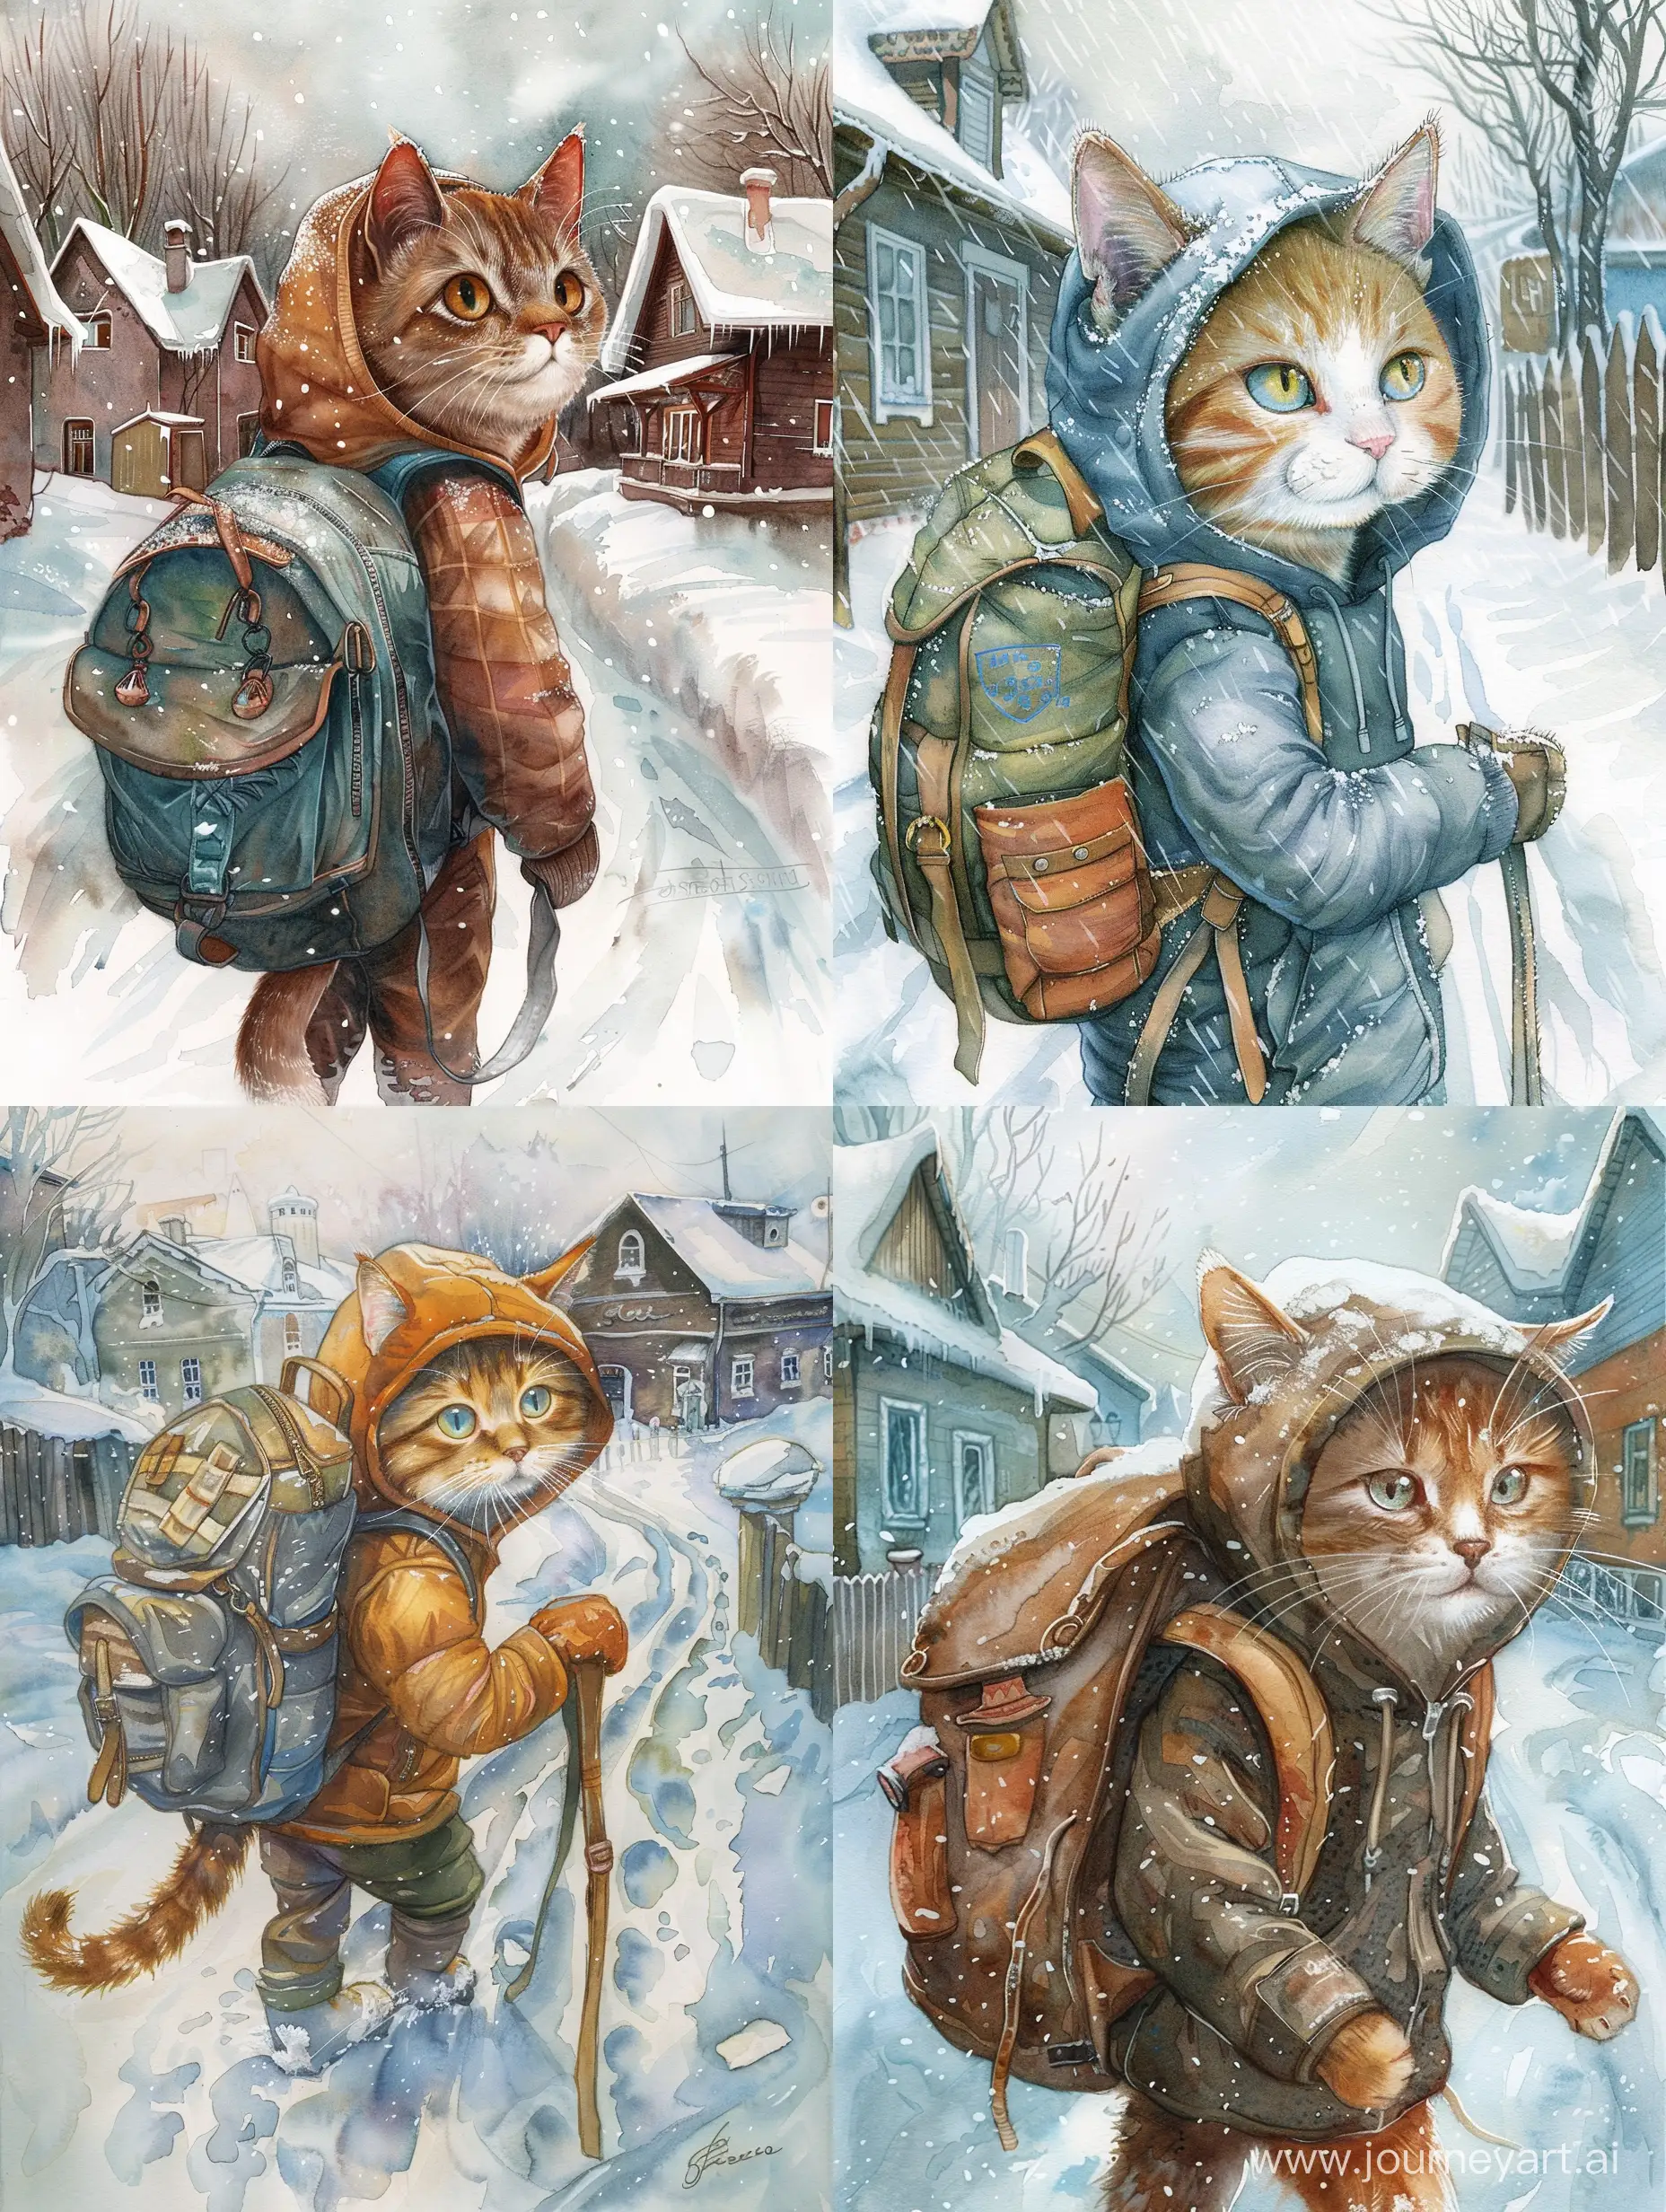 Winter-Scene-Cat-Schoolboy-Braving-Blizzard-with-Backpack